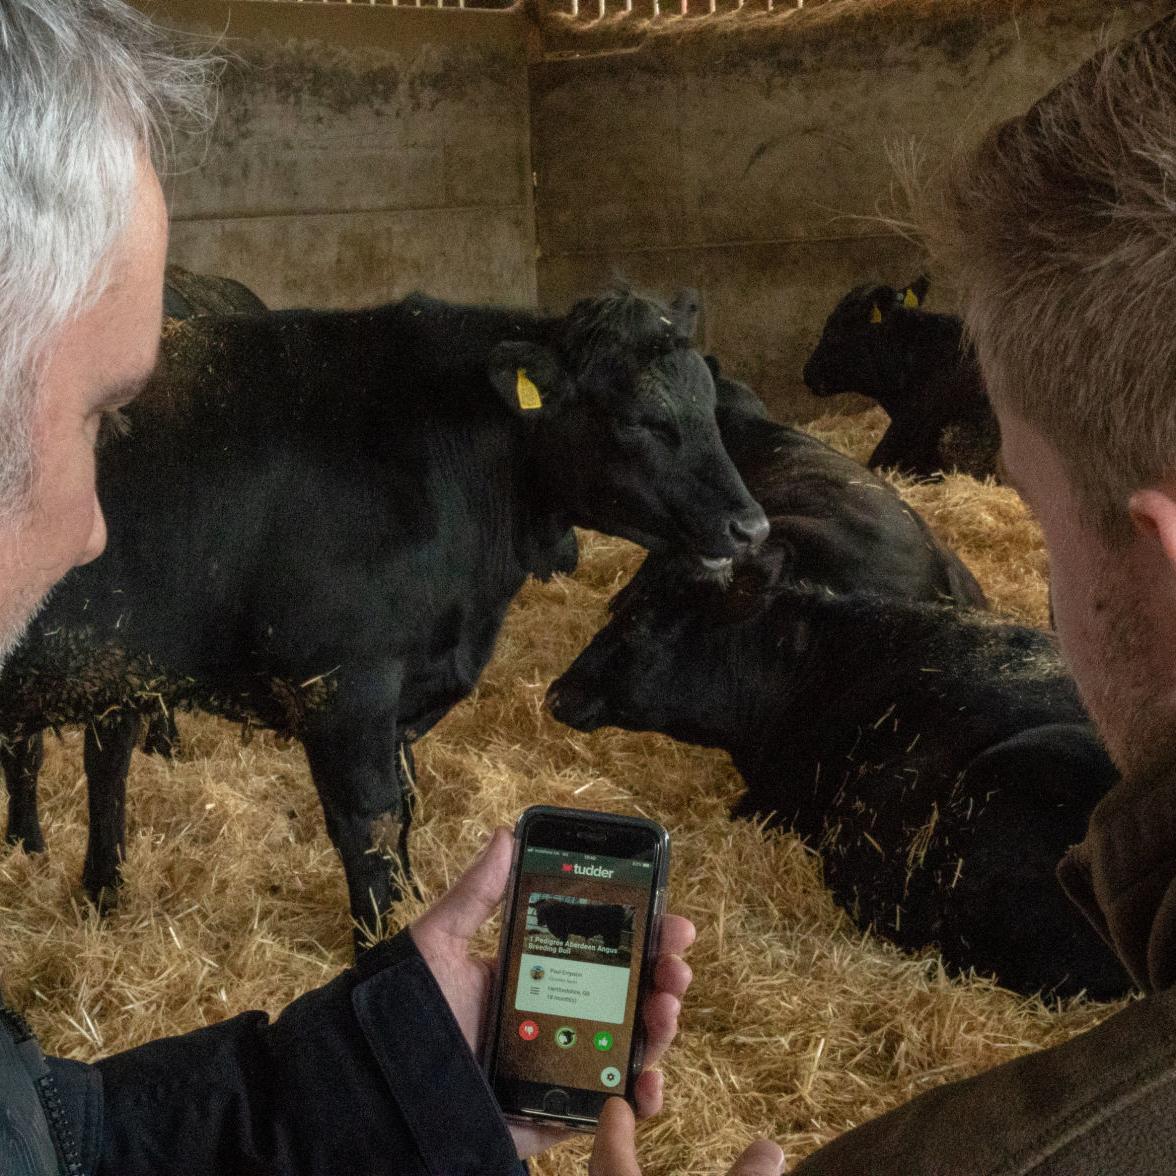 Tinder for cows' matches livestock in the mood for love | Animals |  